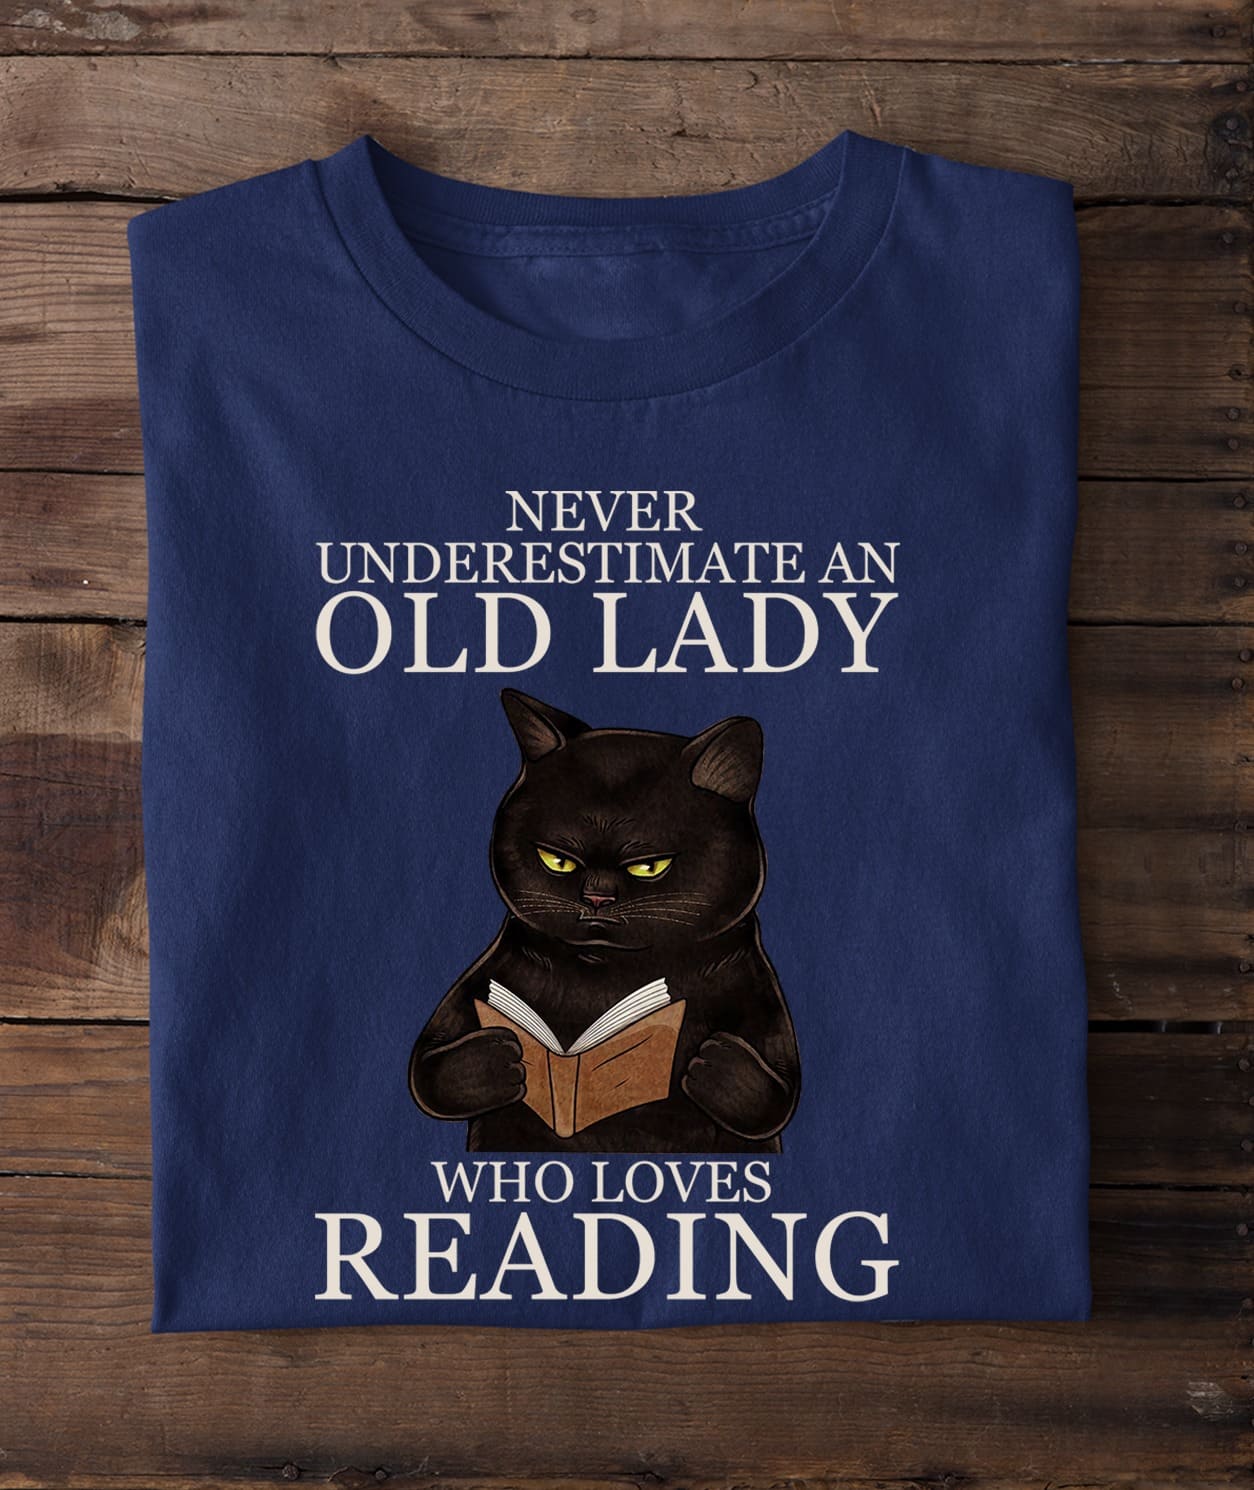 Black Cat Book - Never underestimate an old lady who loves reading